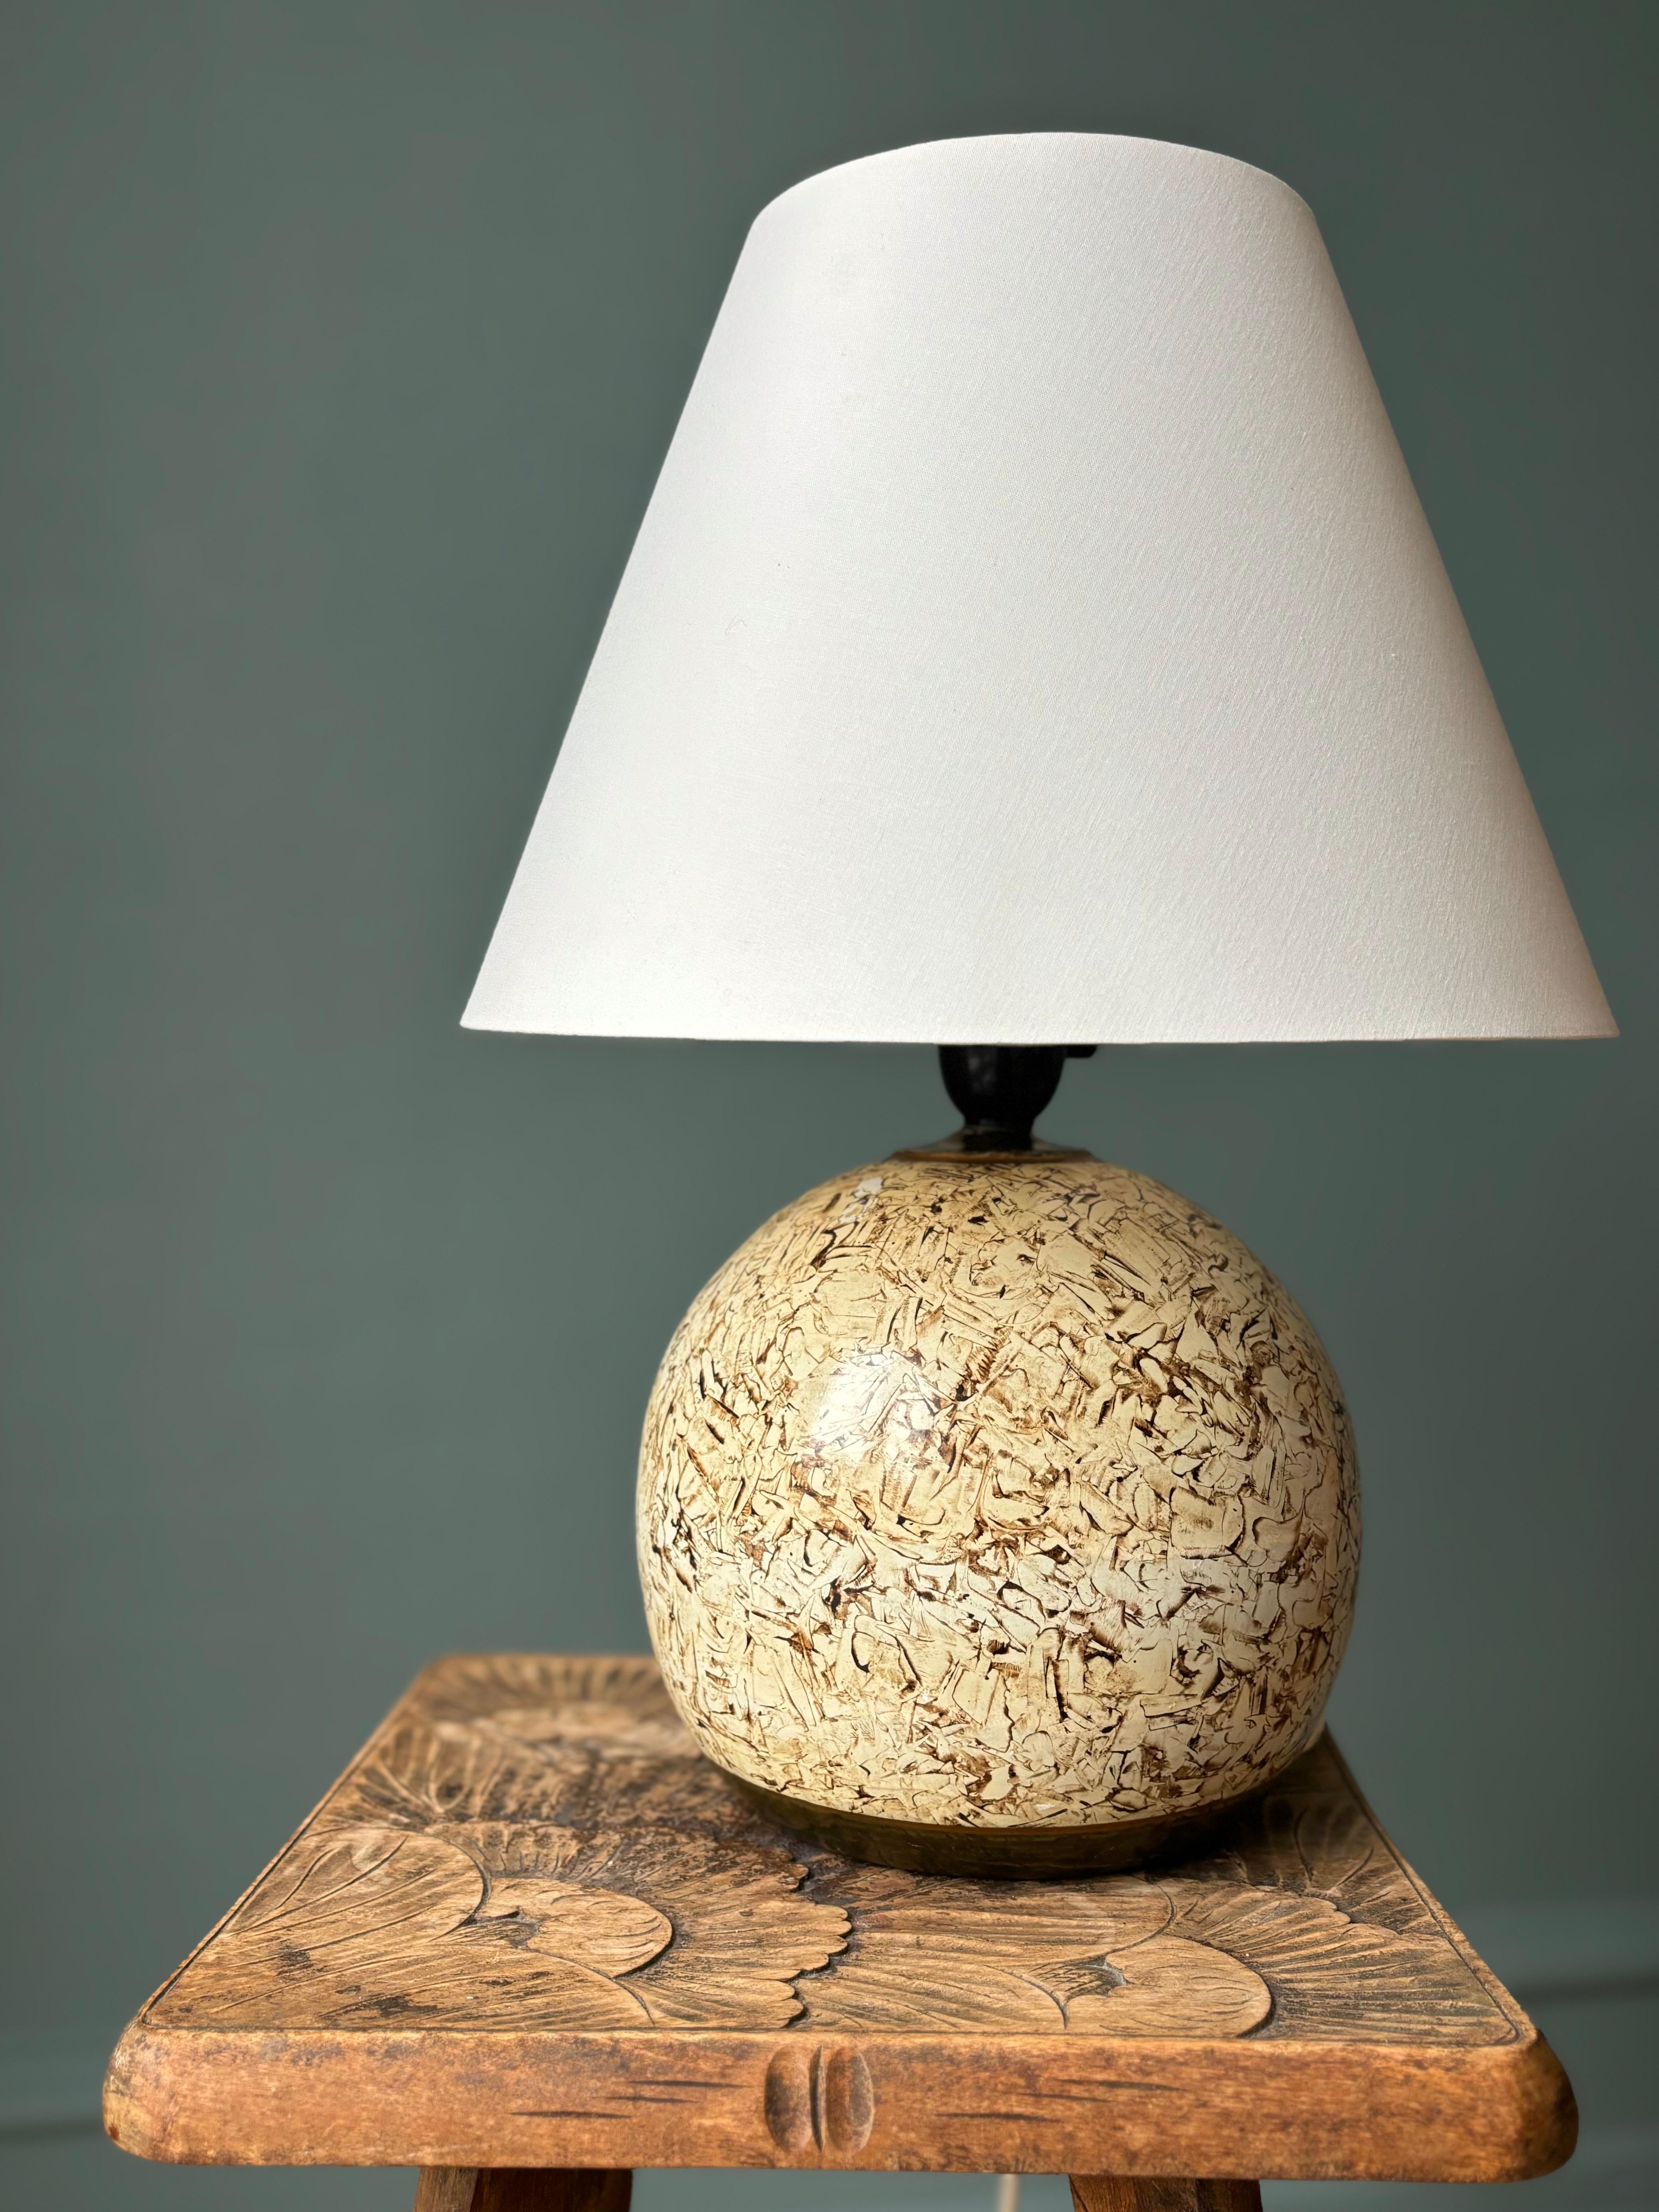 1940s Organic Modern Earthcolored Table Lamp For Sale 1